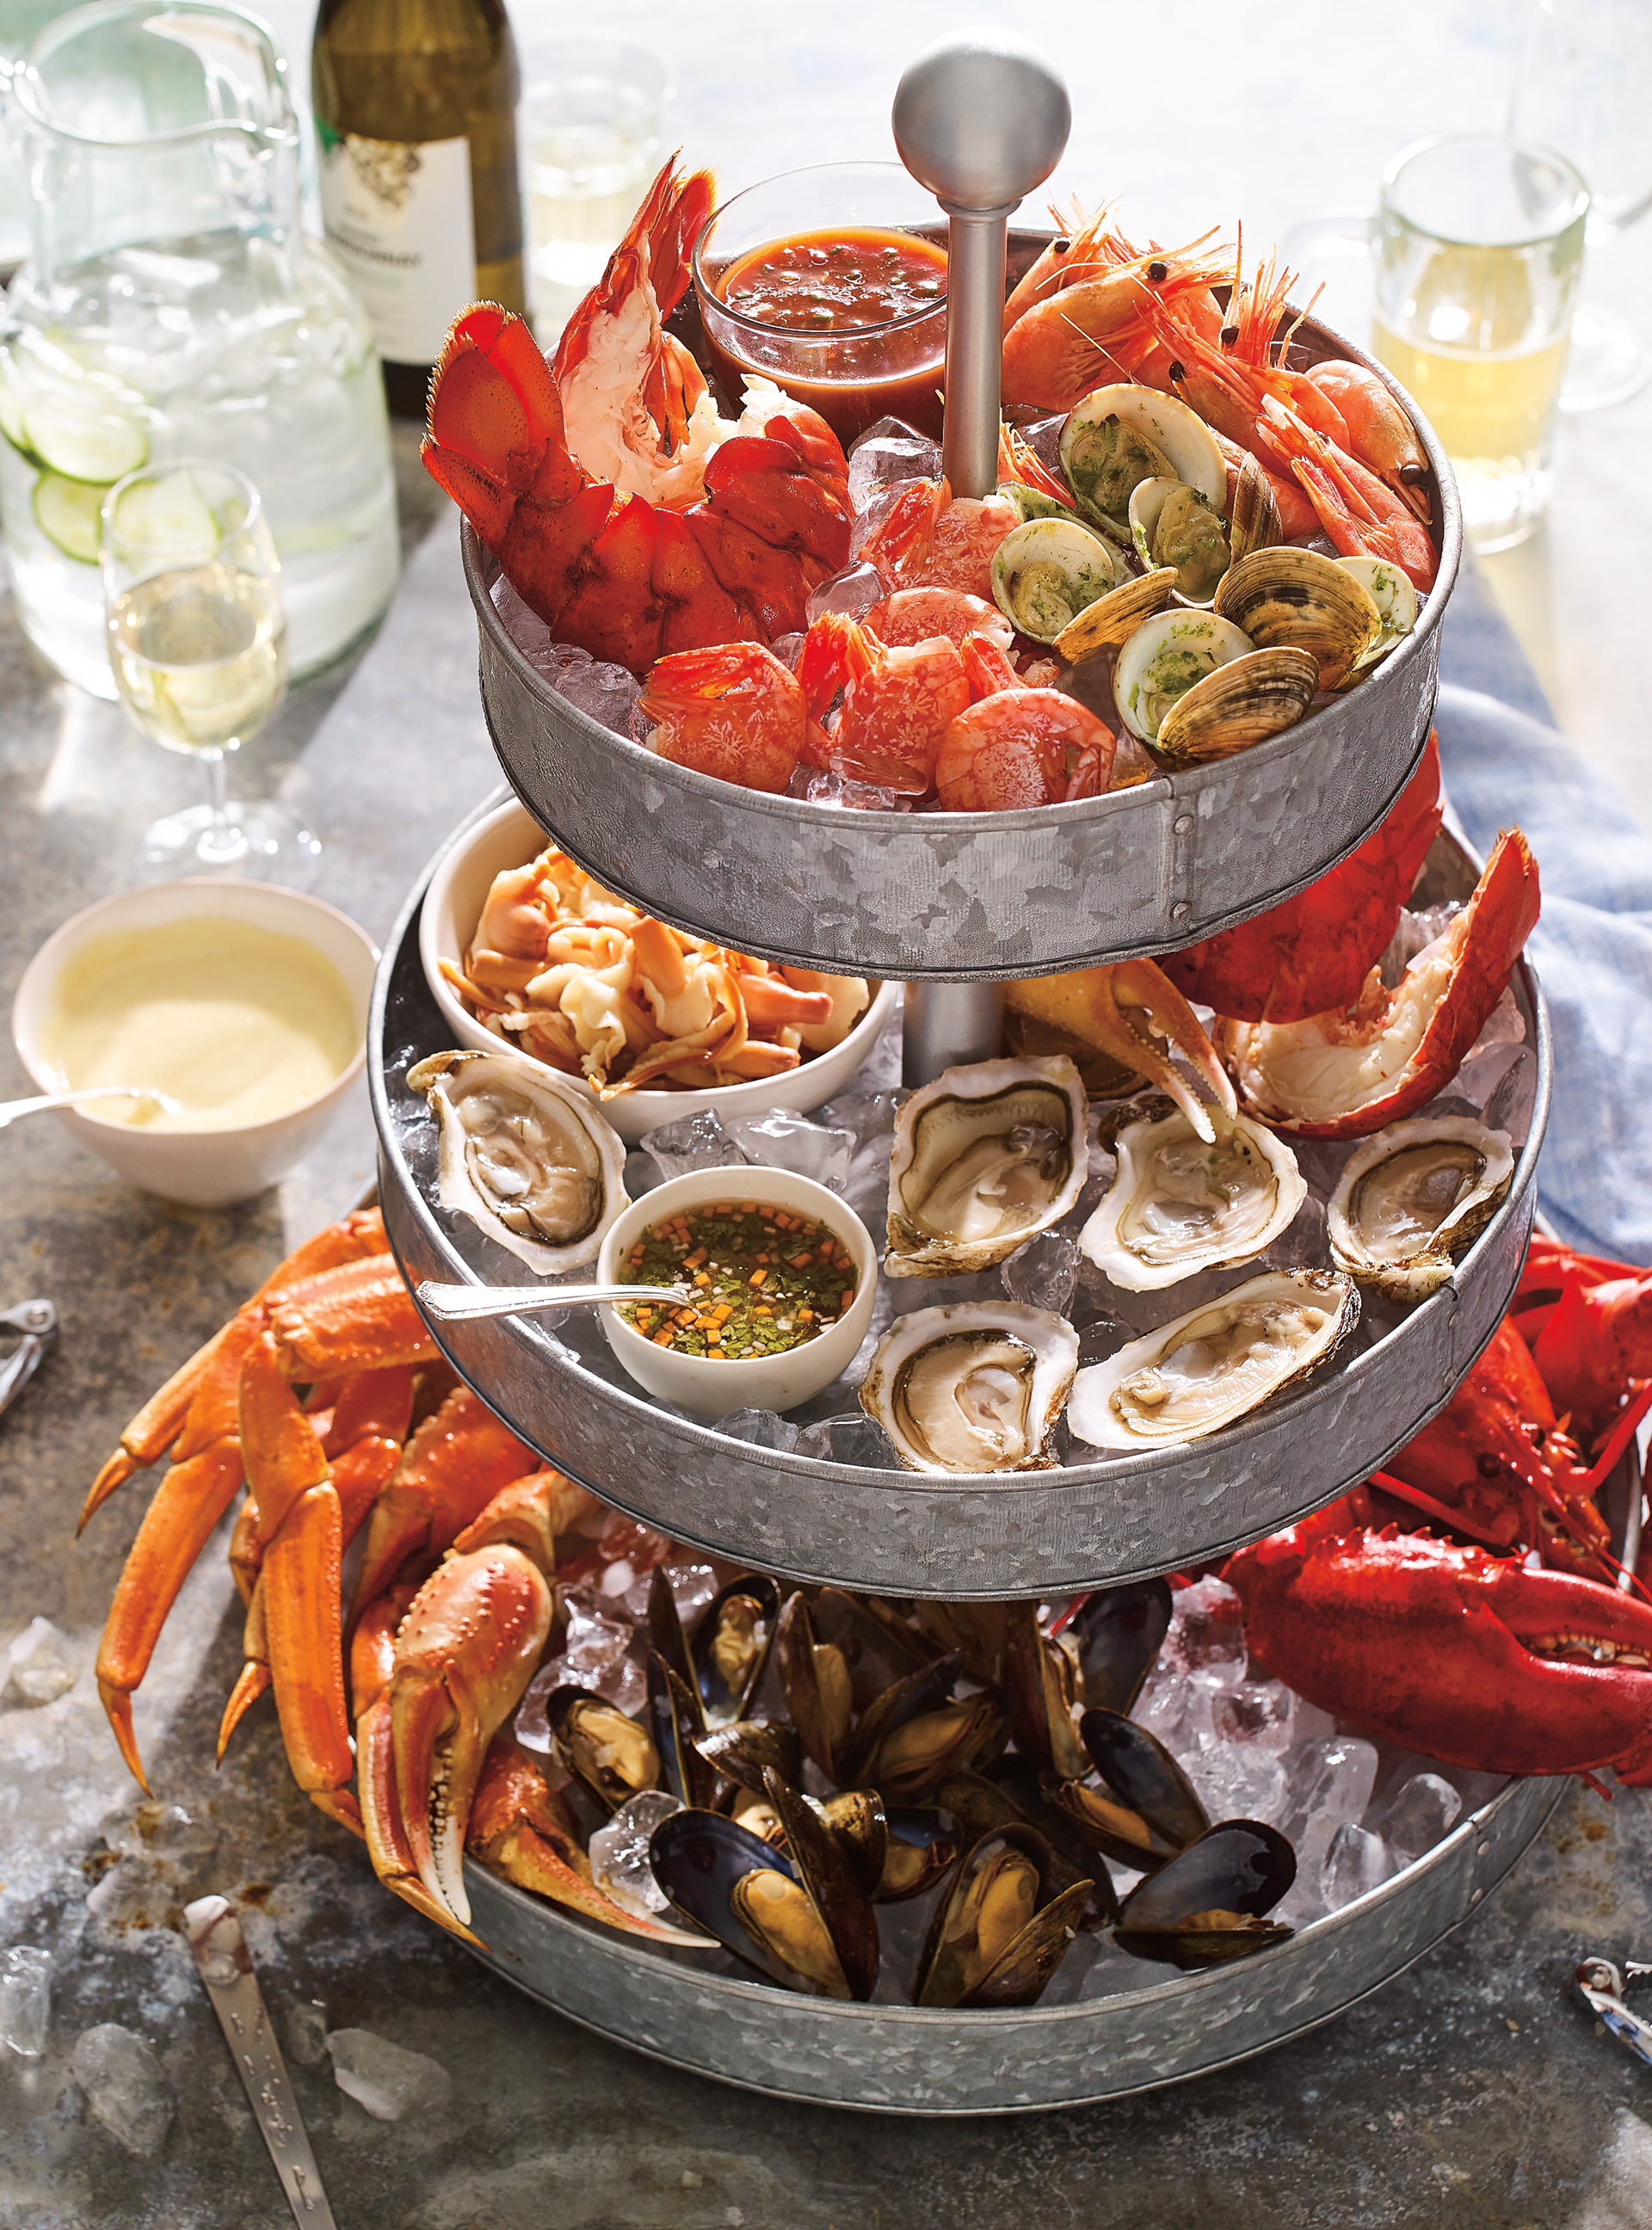 What we put on our seafood platter